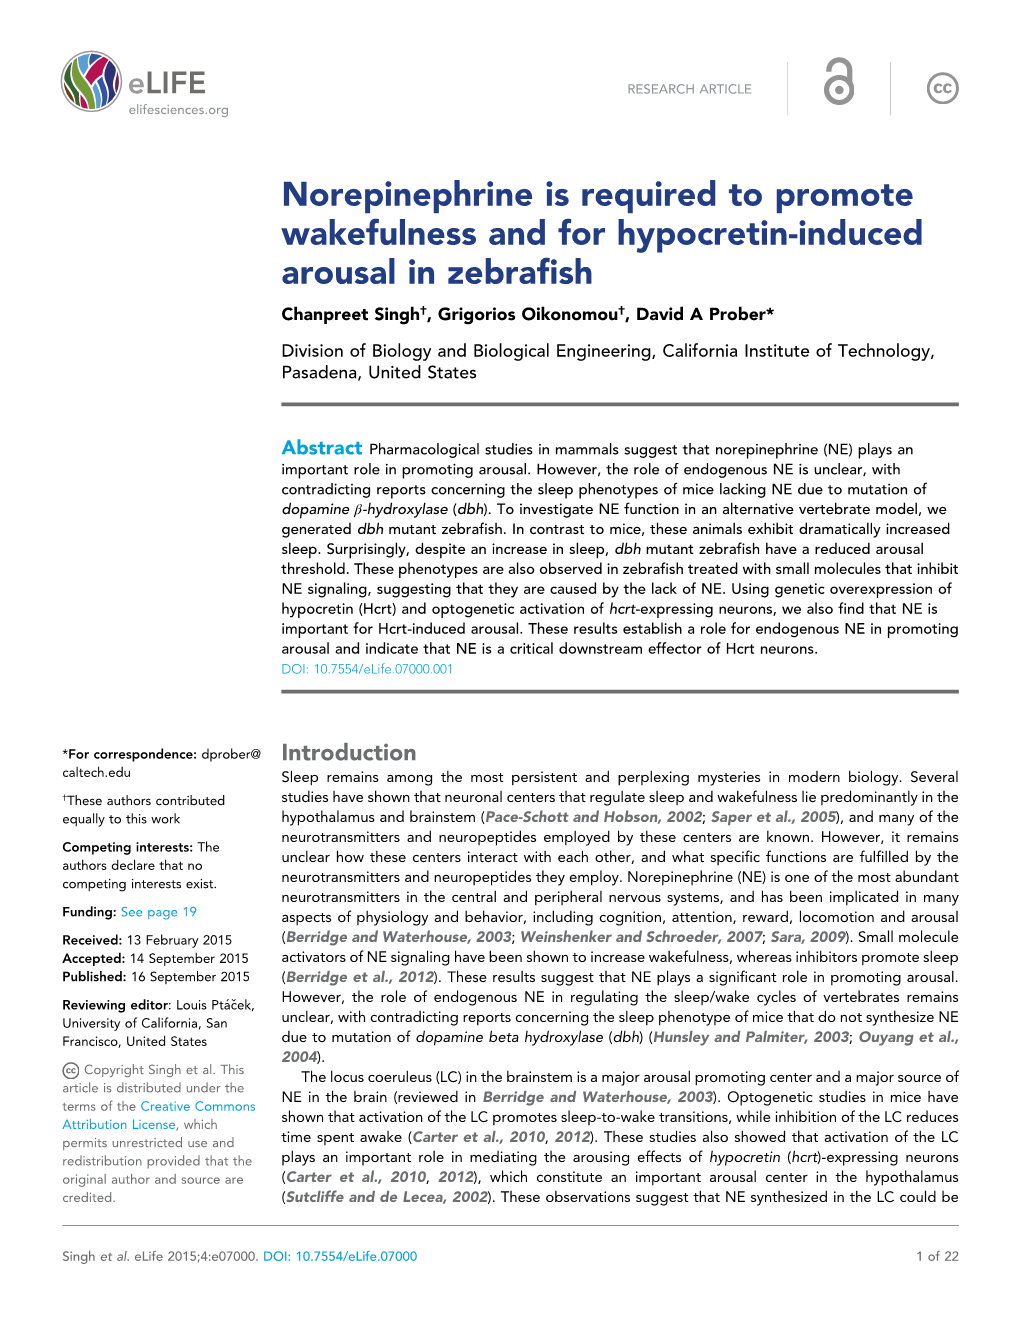 Norepinephrine Is Required to Promote Wakefulness and for Hypocretin-Induced Arousal in Zebrafish Chanpreet Singh†, Grigorios Oikonomou†, David a Prober*